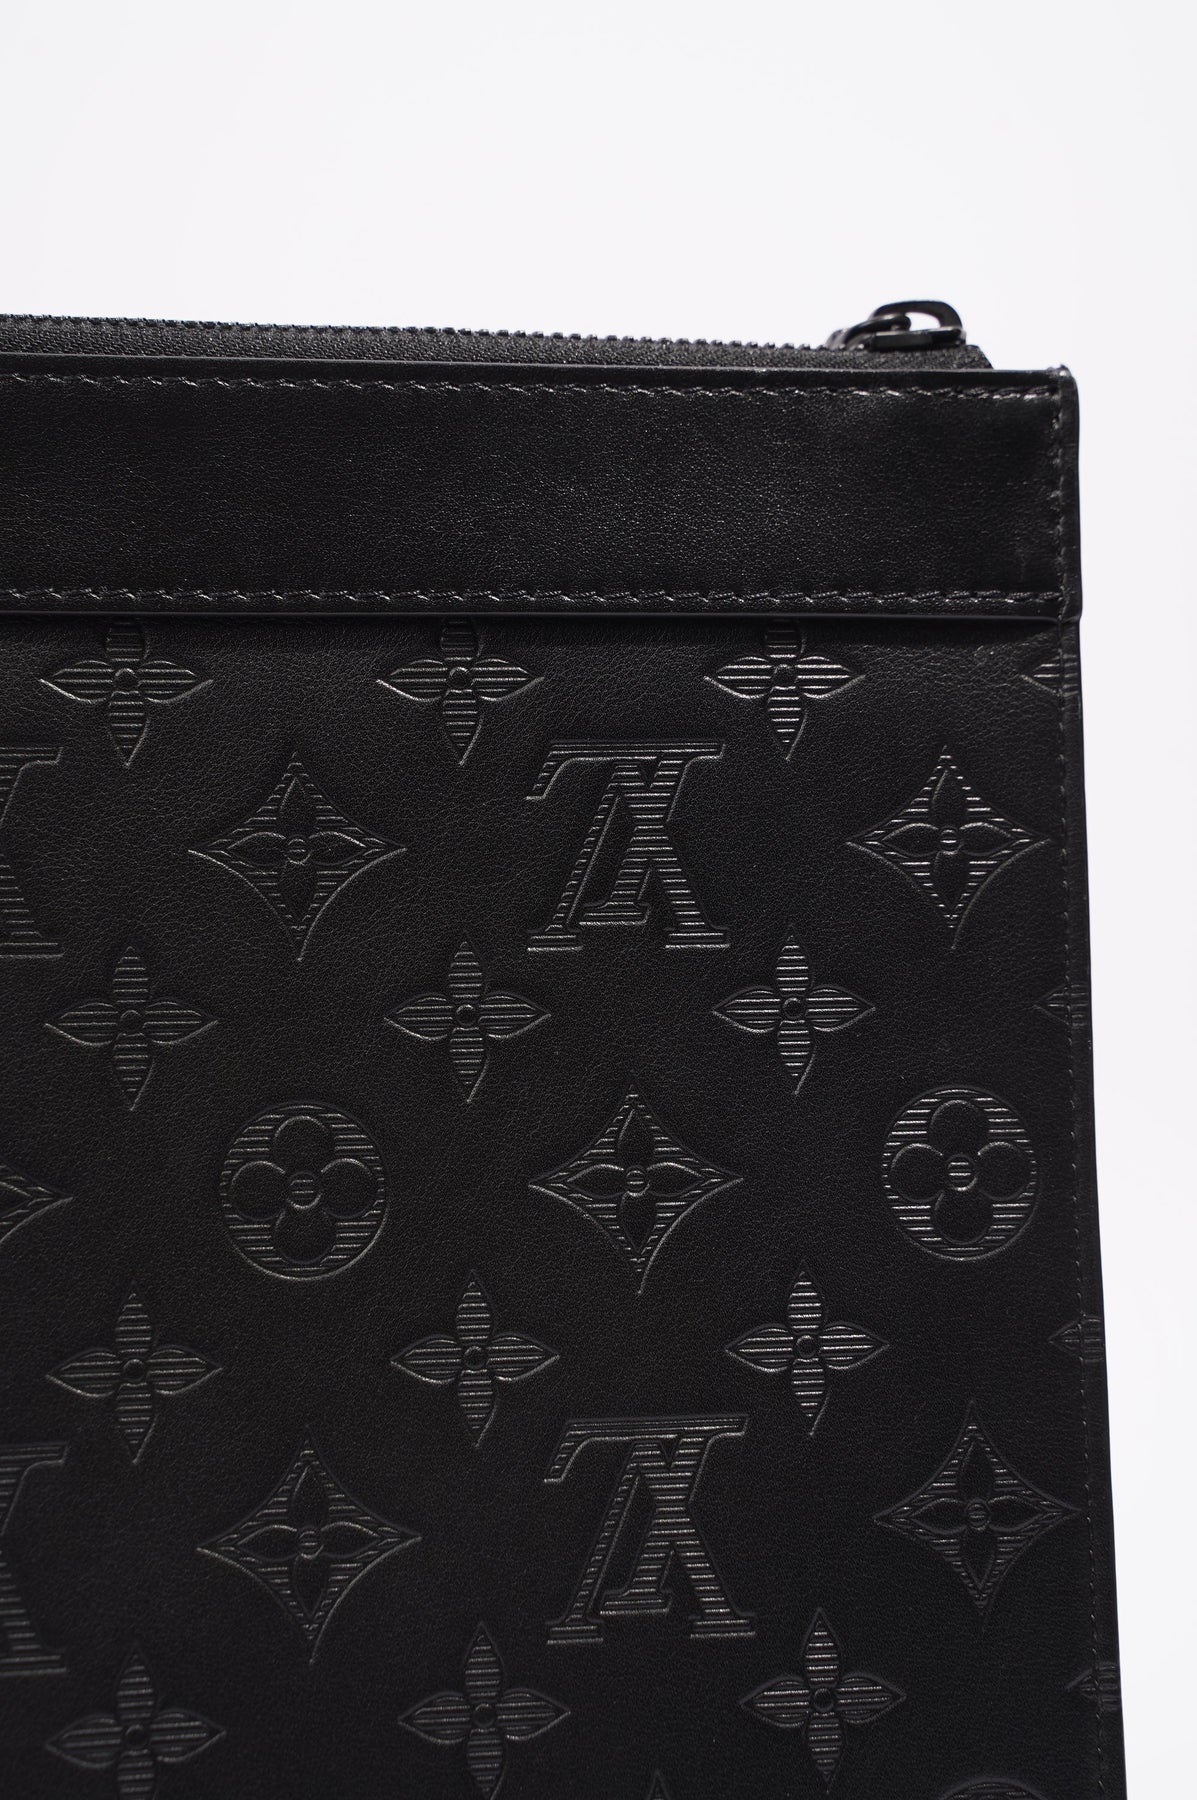 Pochette Jour Monogram Shadow Leather - Wallets and Small Leather Goods  M82080